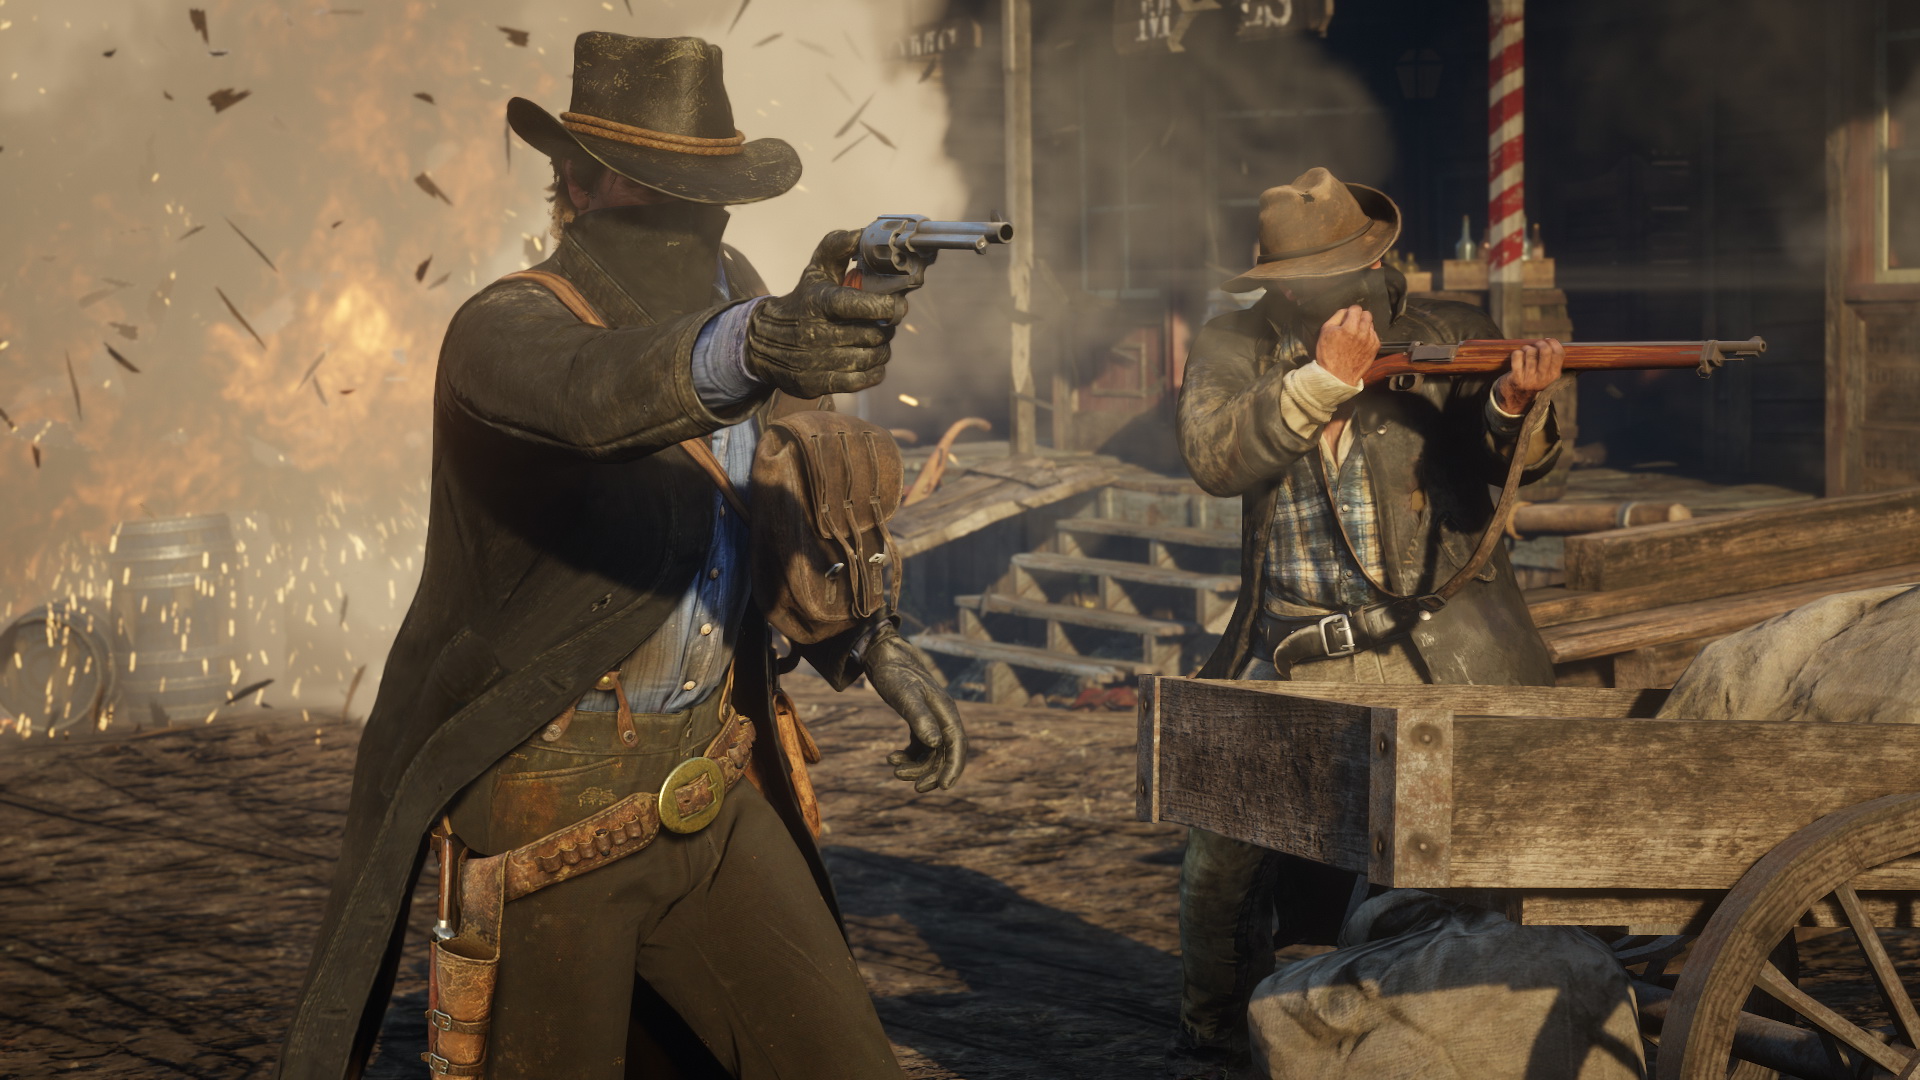 Red Dead Redemption 2 is getting DLSS in the next update